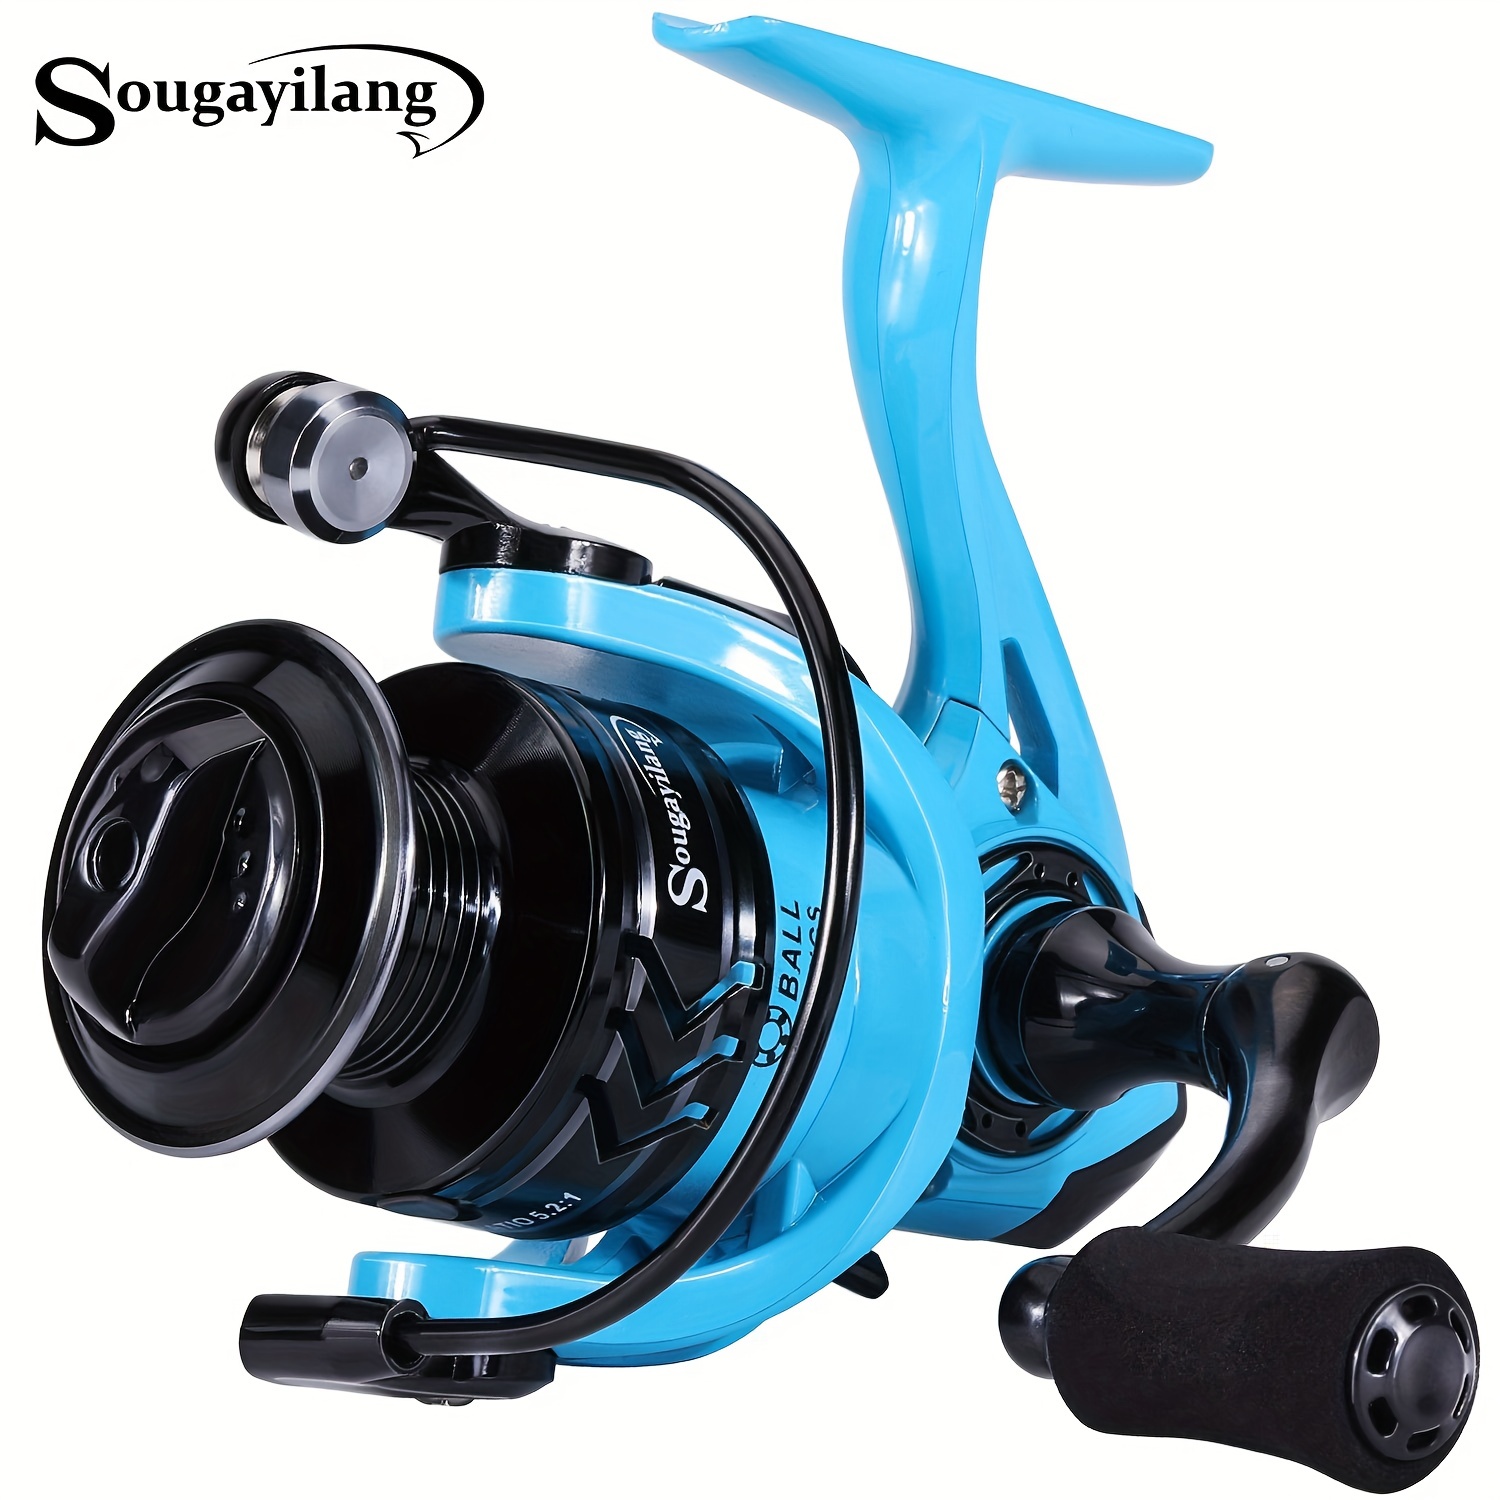 Ultralight Fishing Reel Gear Ratio 5.2:1 Spinning Reel With 60m